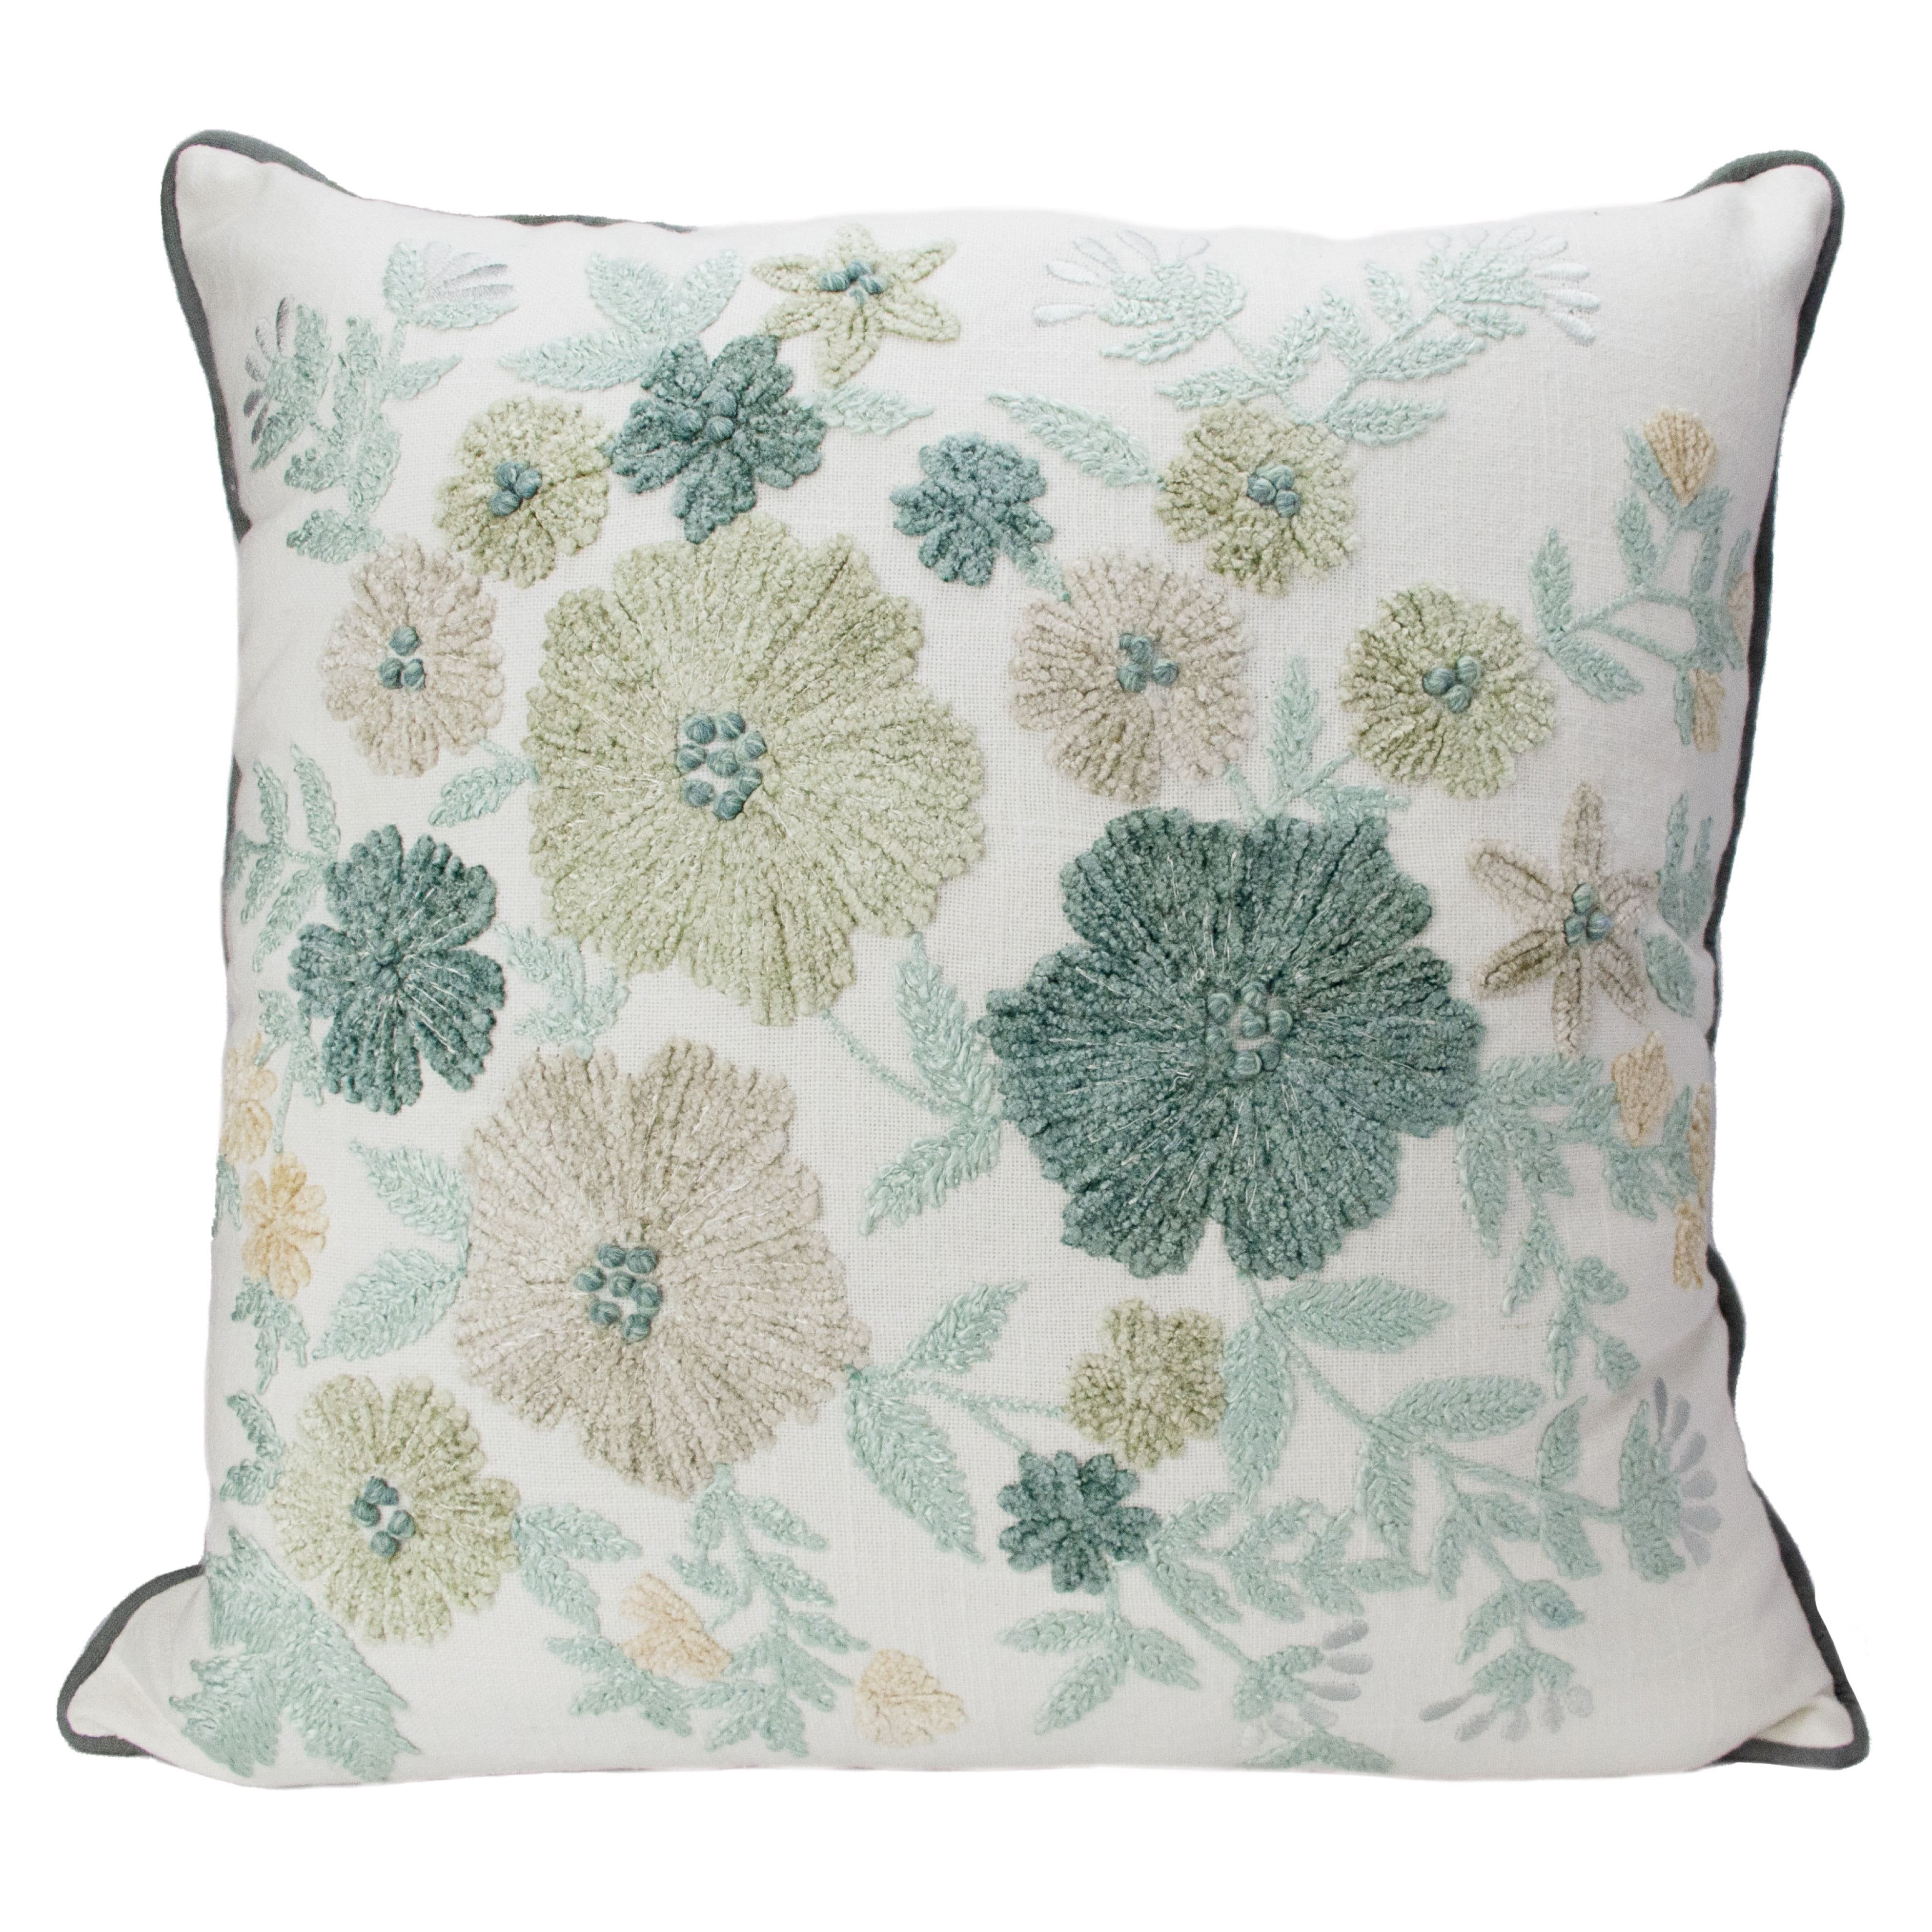 16 Home Decor Pillow kit (PILLOW INSERT NOT INCLUDED MUST BE PURCHASED  SEPARATELY) - Large Floral pattern in earth tones of light teal, tan, blue,  and olive green on off white 